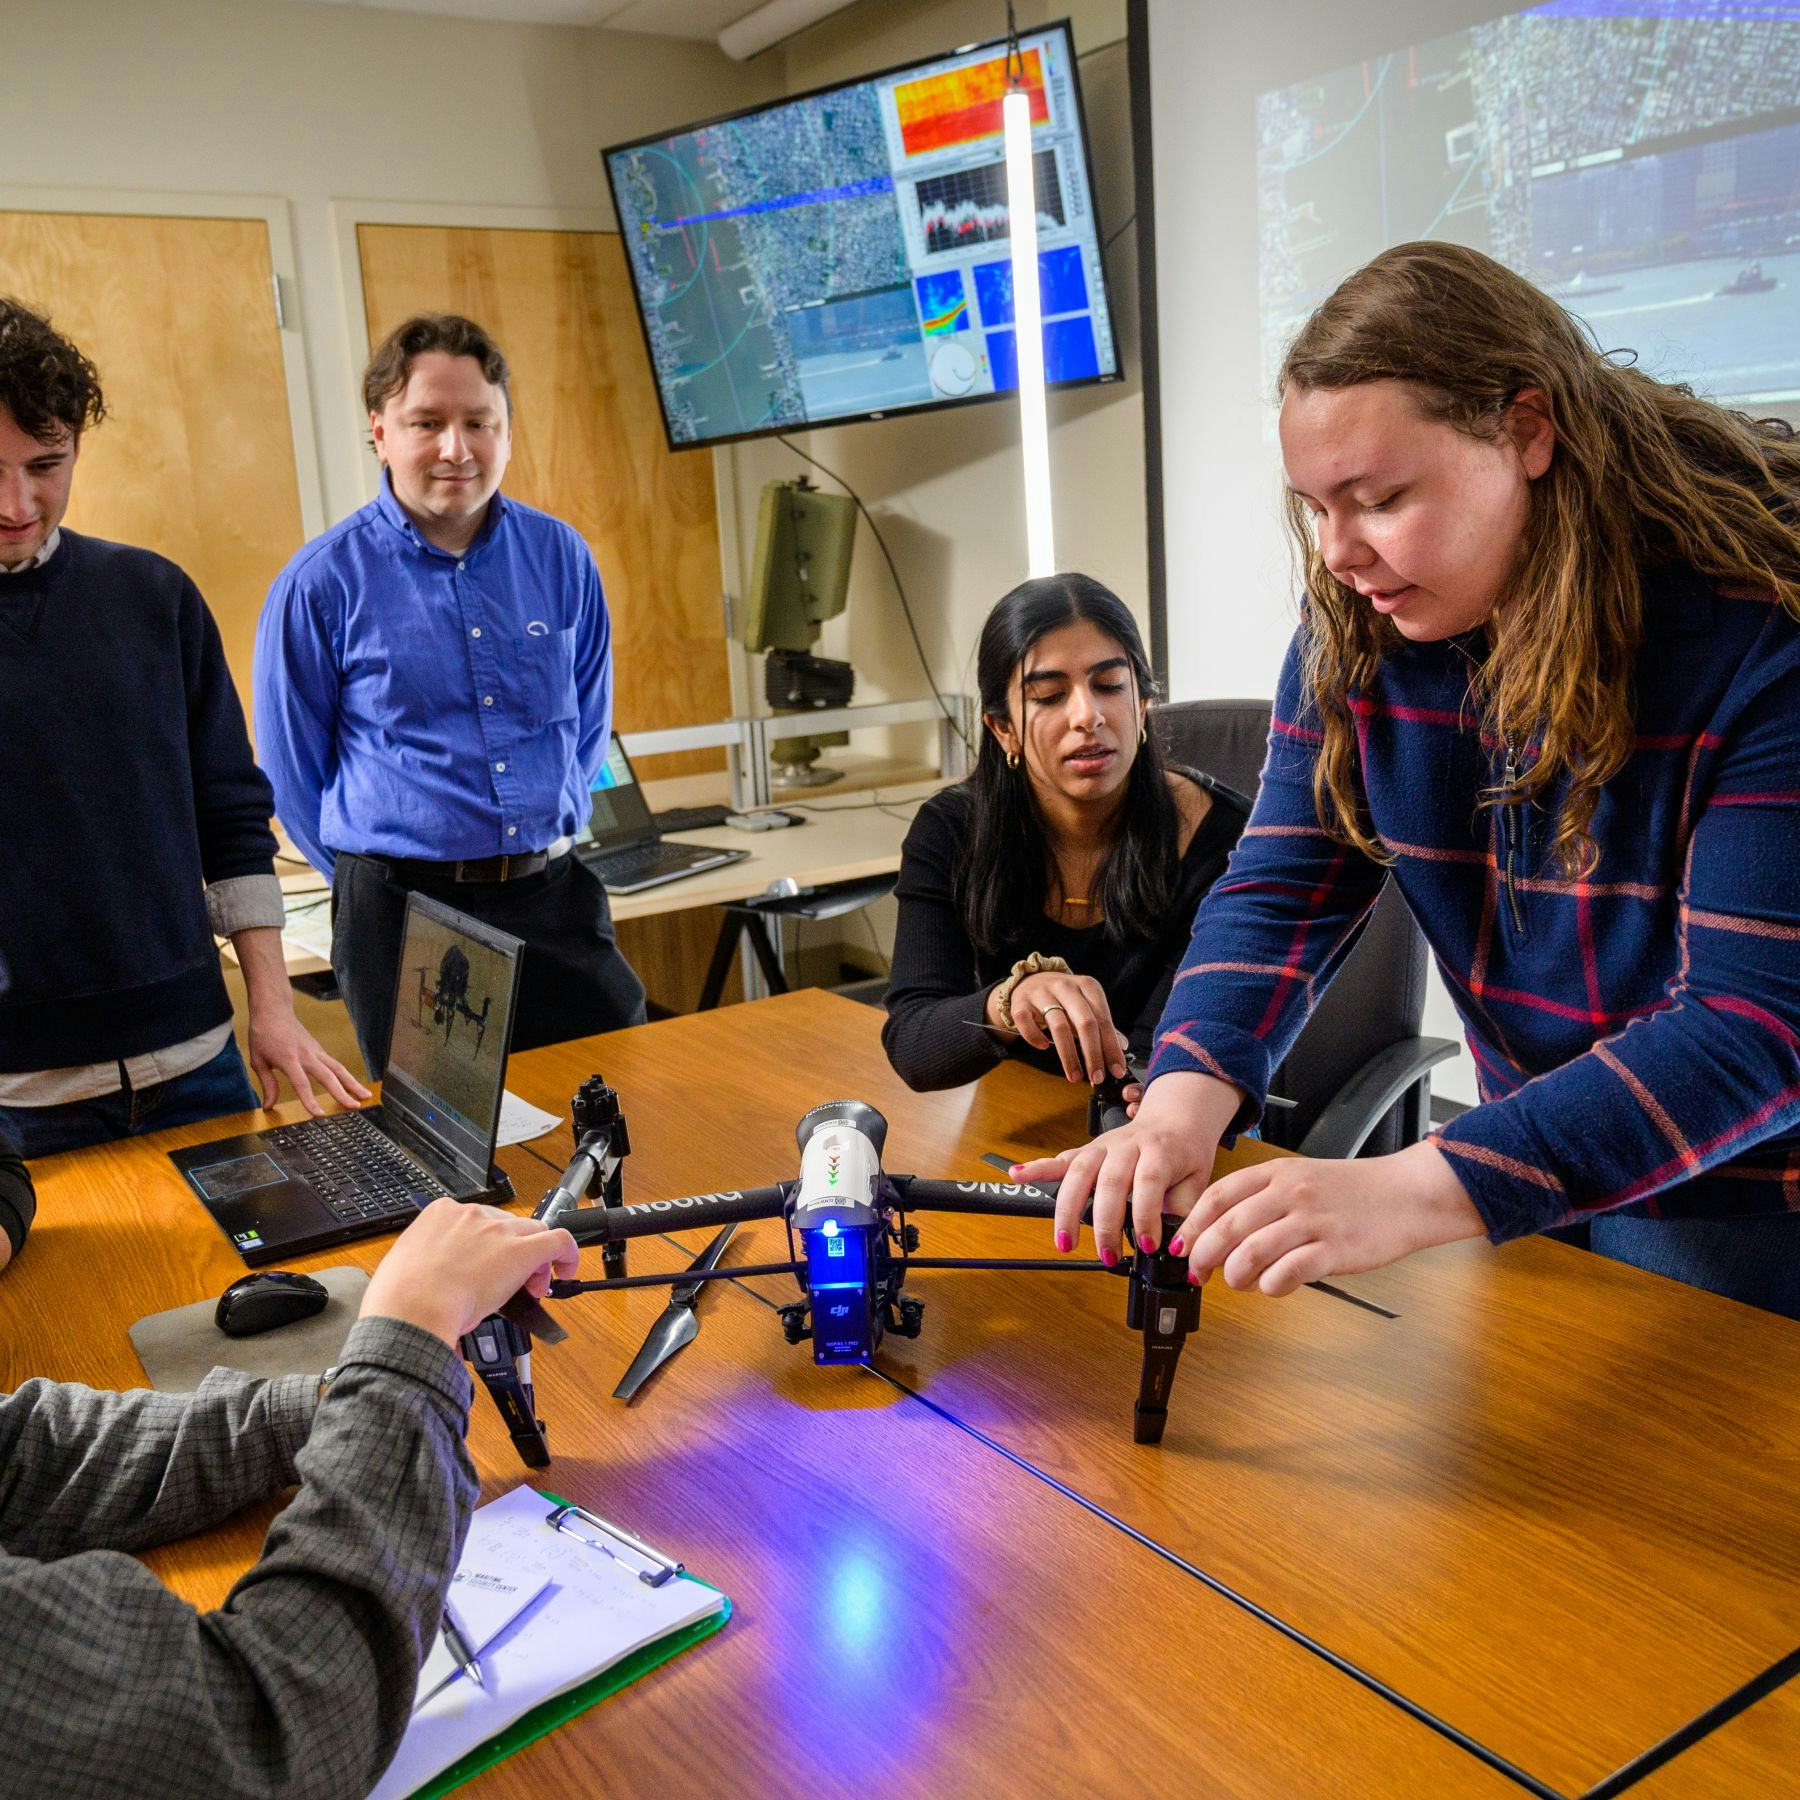 Students and professor adjust a drone in a classroom.